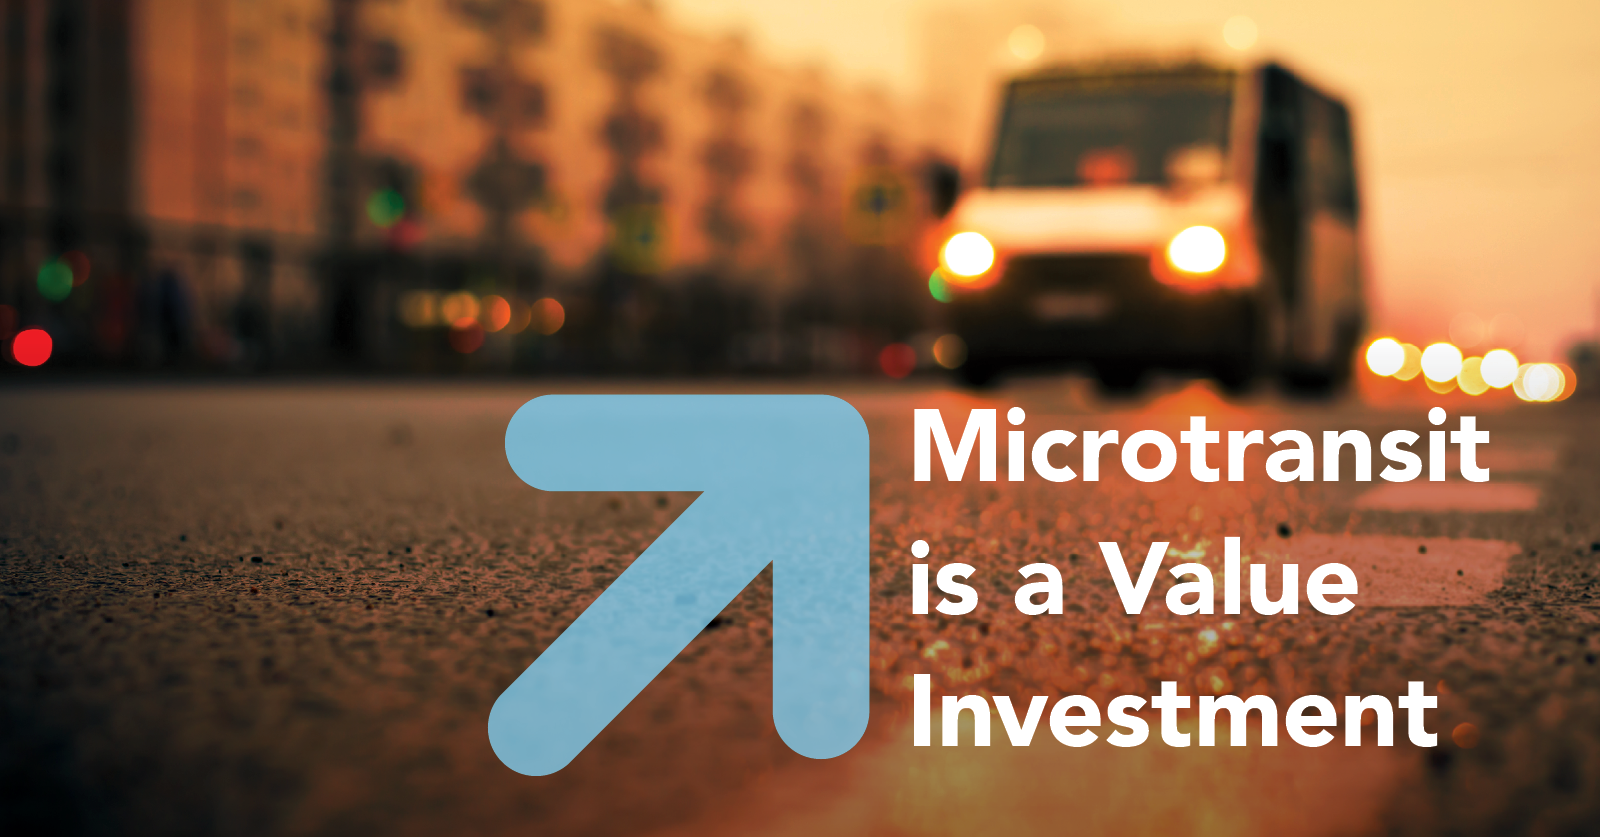 Microtransit is a value investment